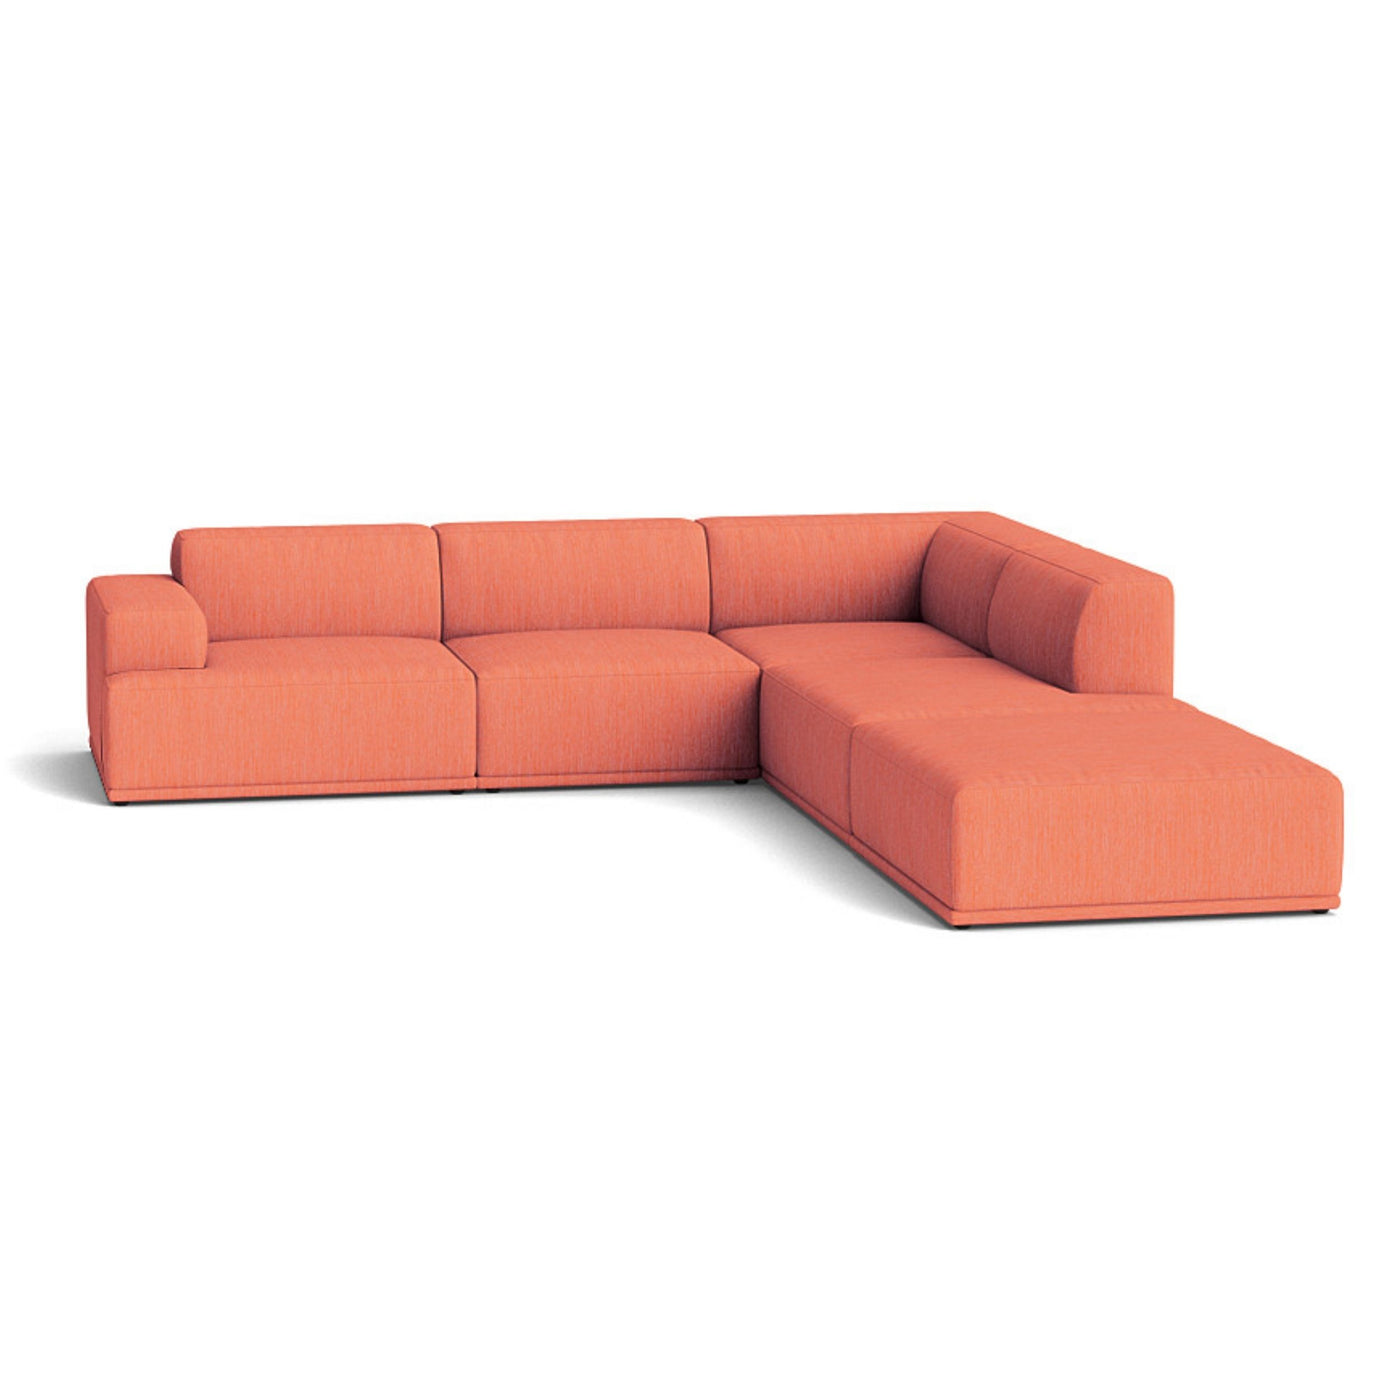 Muuto Connect Soft Modular Corner Sofa, configuration 2. Made-to-order from someday designs. #colour_balder-542